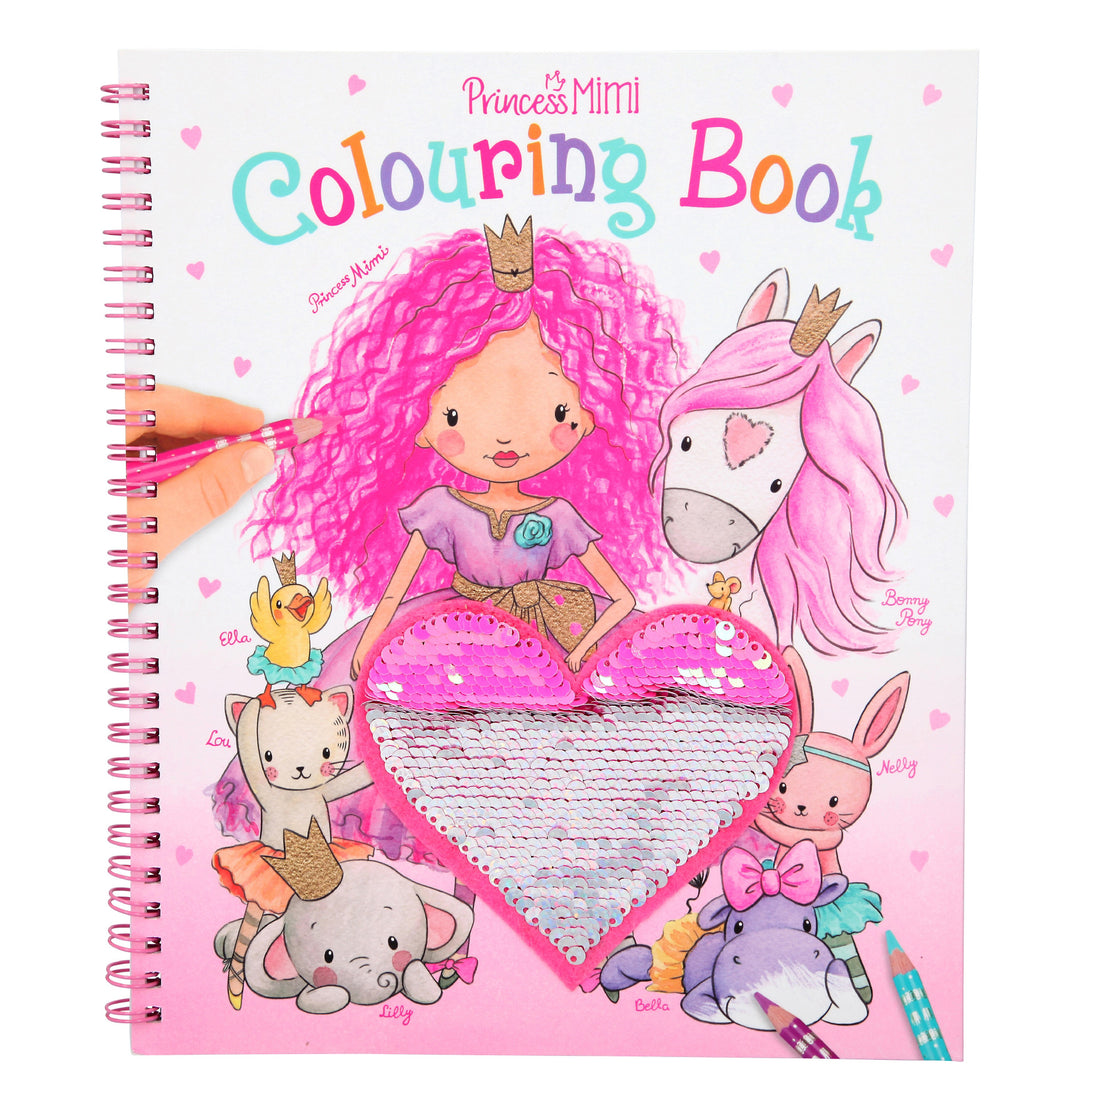 depesche-princess-mimi-colouring-book-with-sequins-pink-heart-animals- (3)